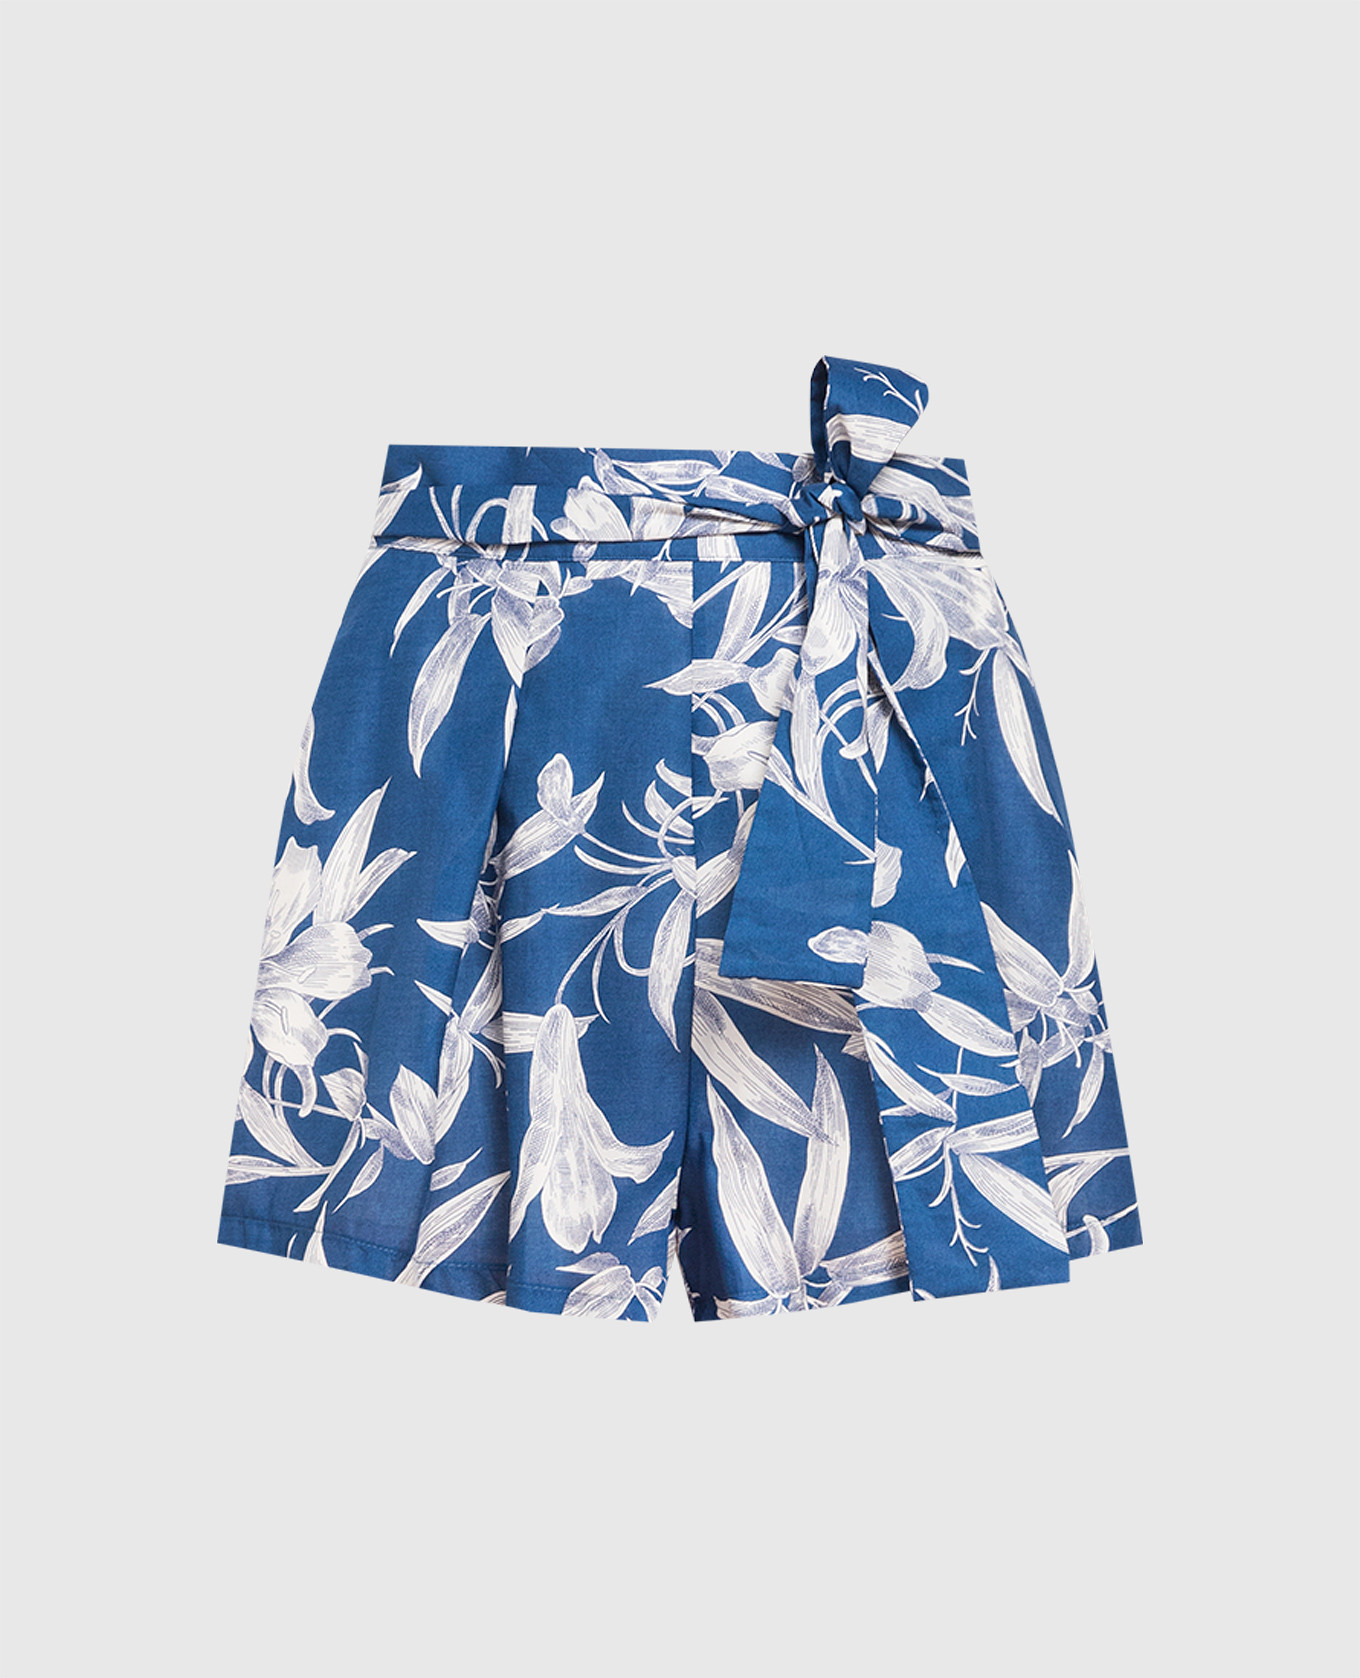 Blue shorts in floral print